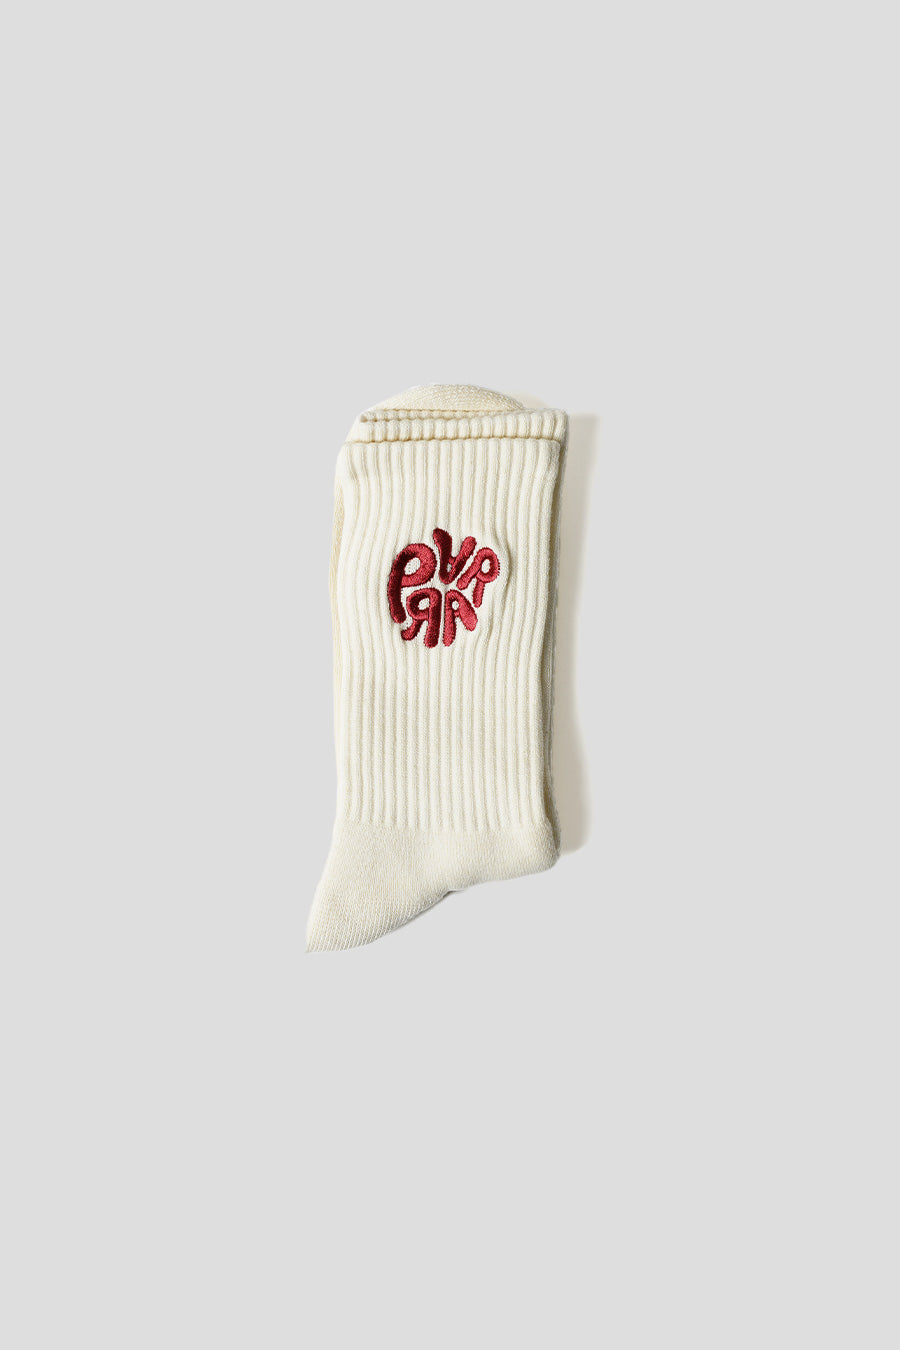 BY PARRA - 1976 CREW LOGO SOCKS WHITE AND BRICK RED - LE LABO STORE